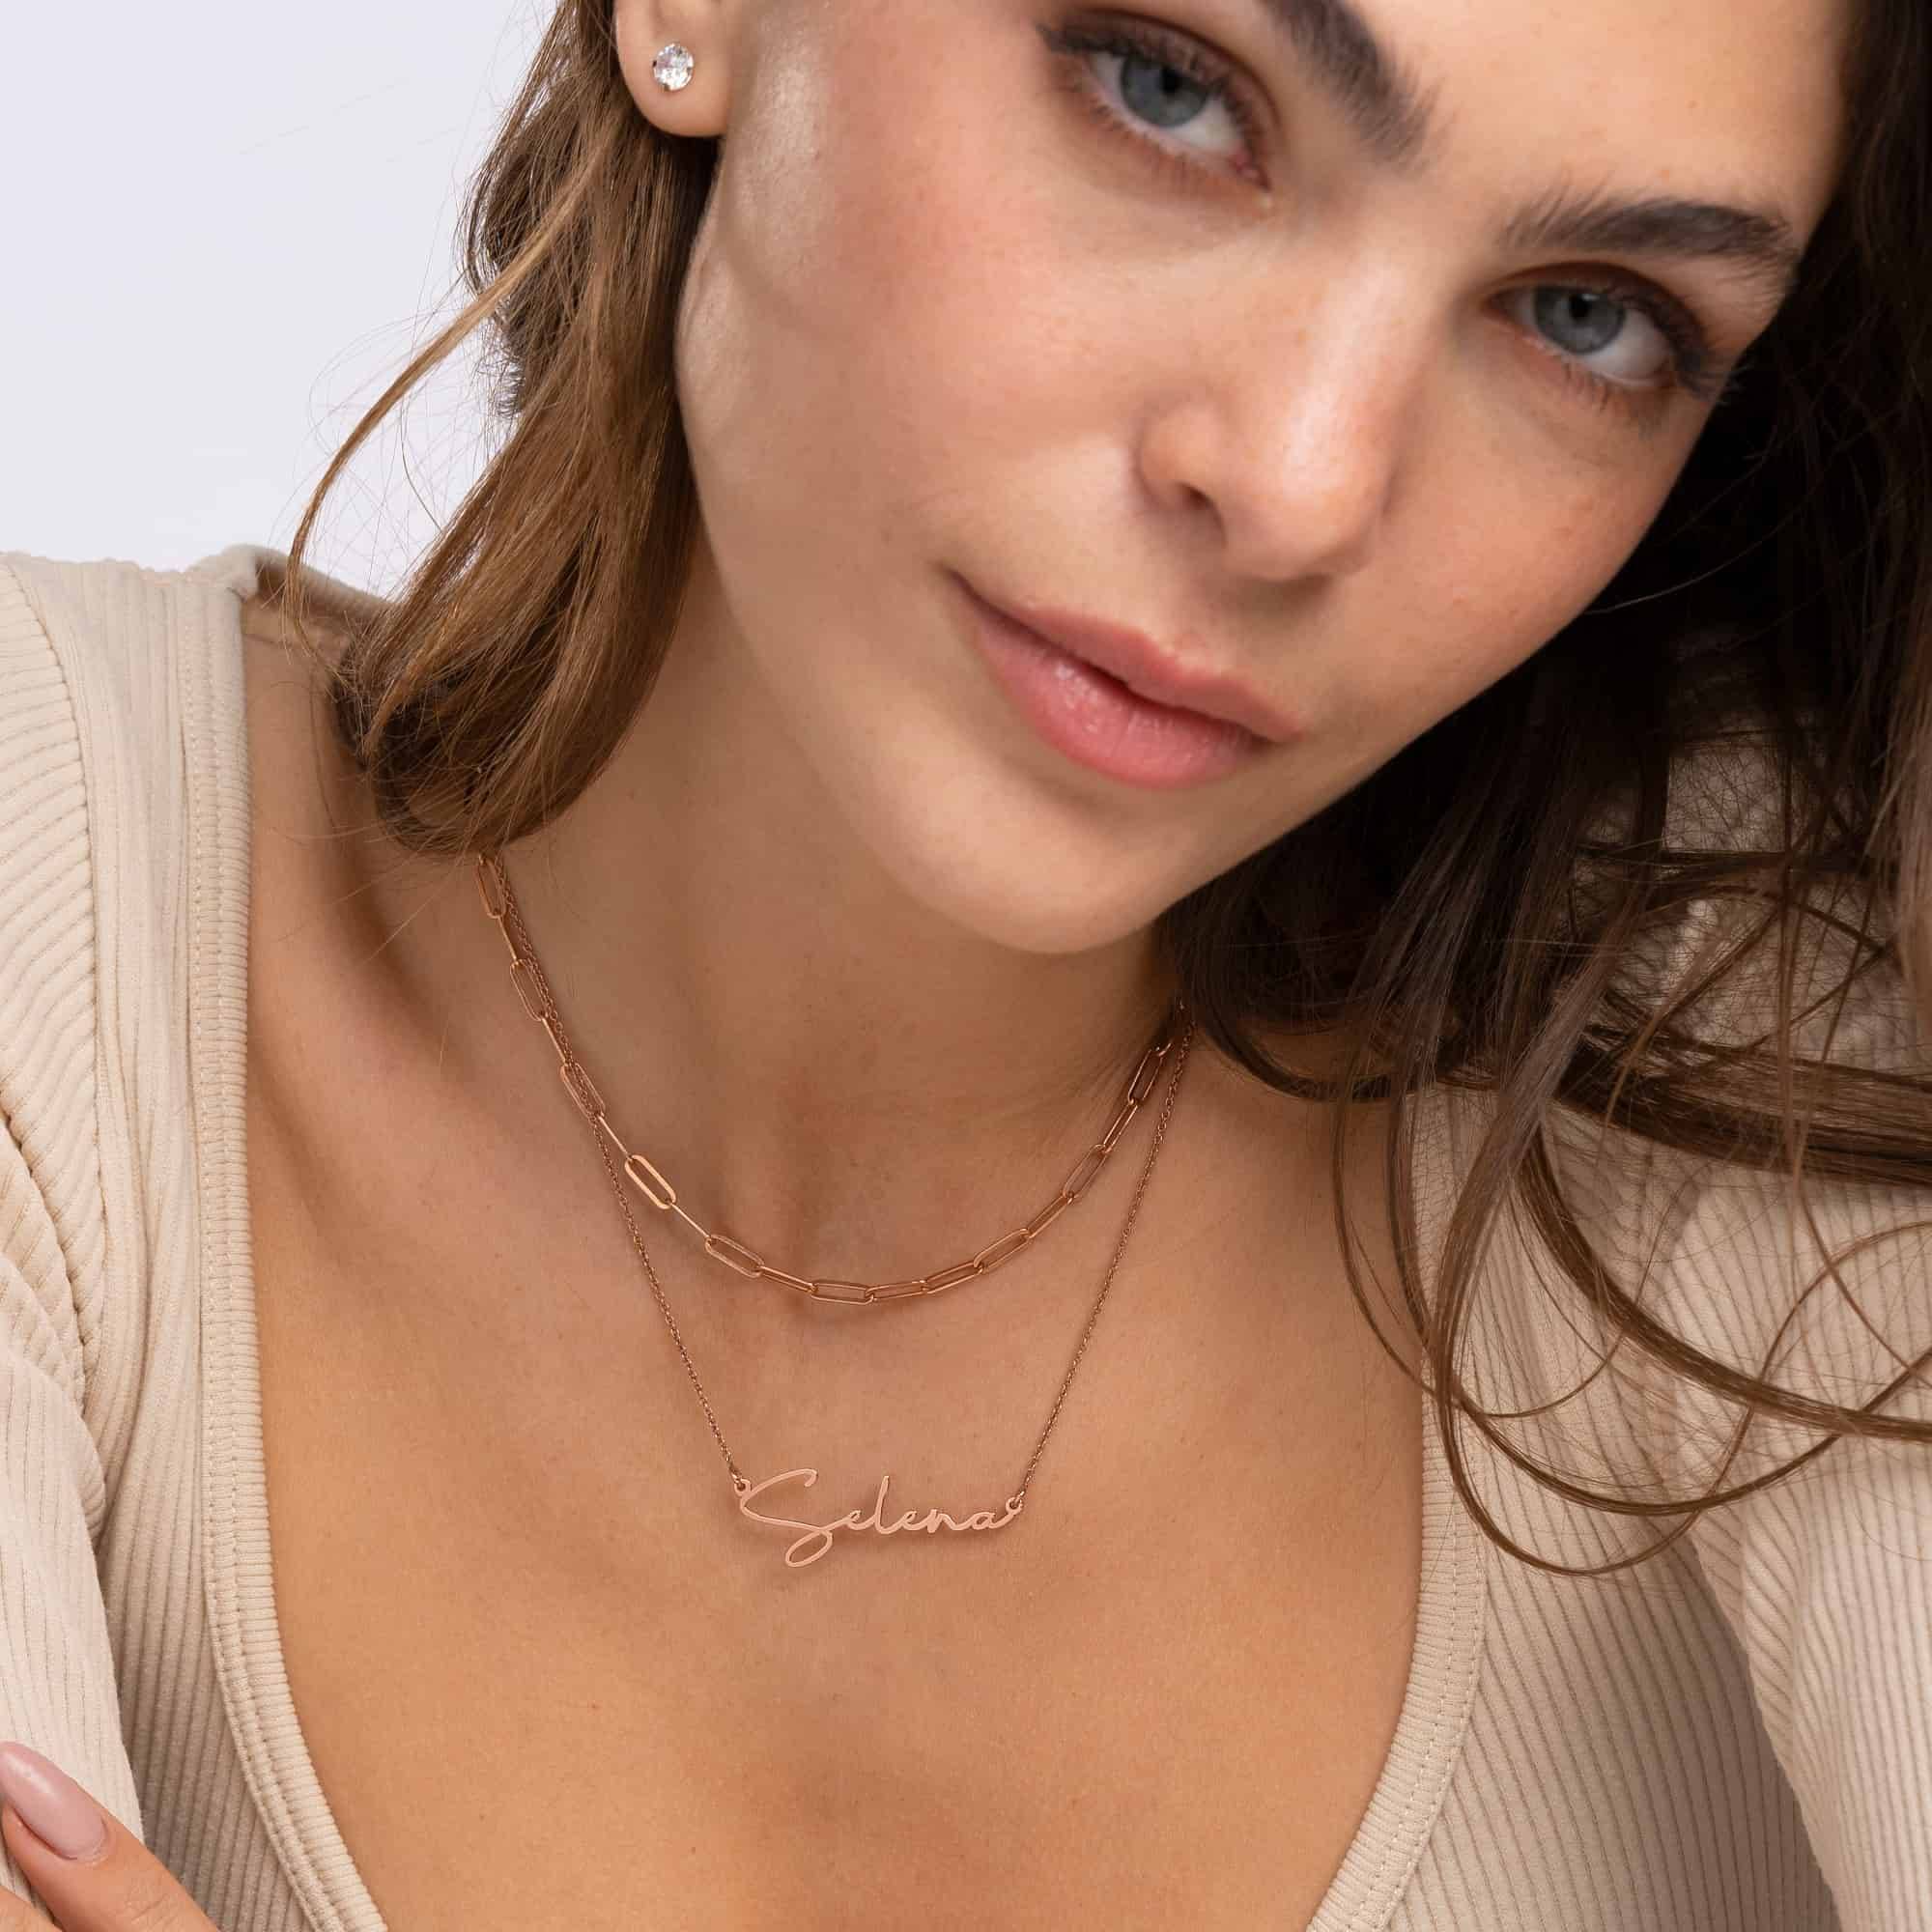 Paris Name Necklace in 18ct Rose Gold Plating-1 product photo